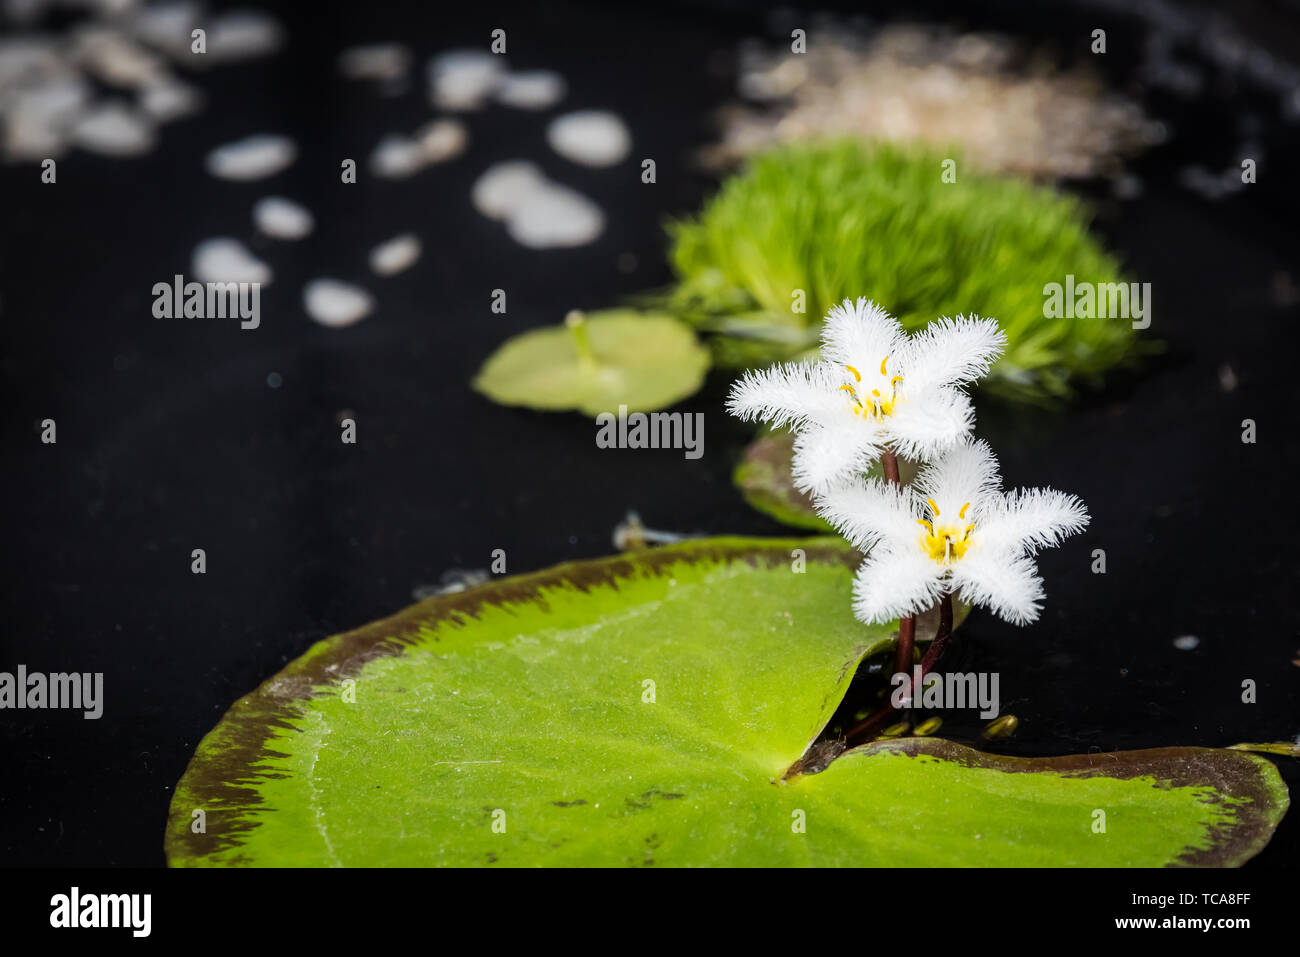 A leaf lotus and a chrysanthemum. Stock Photo